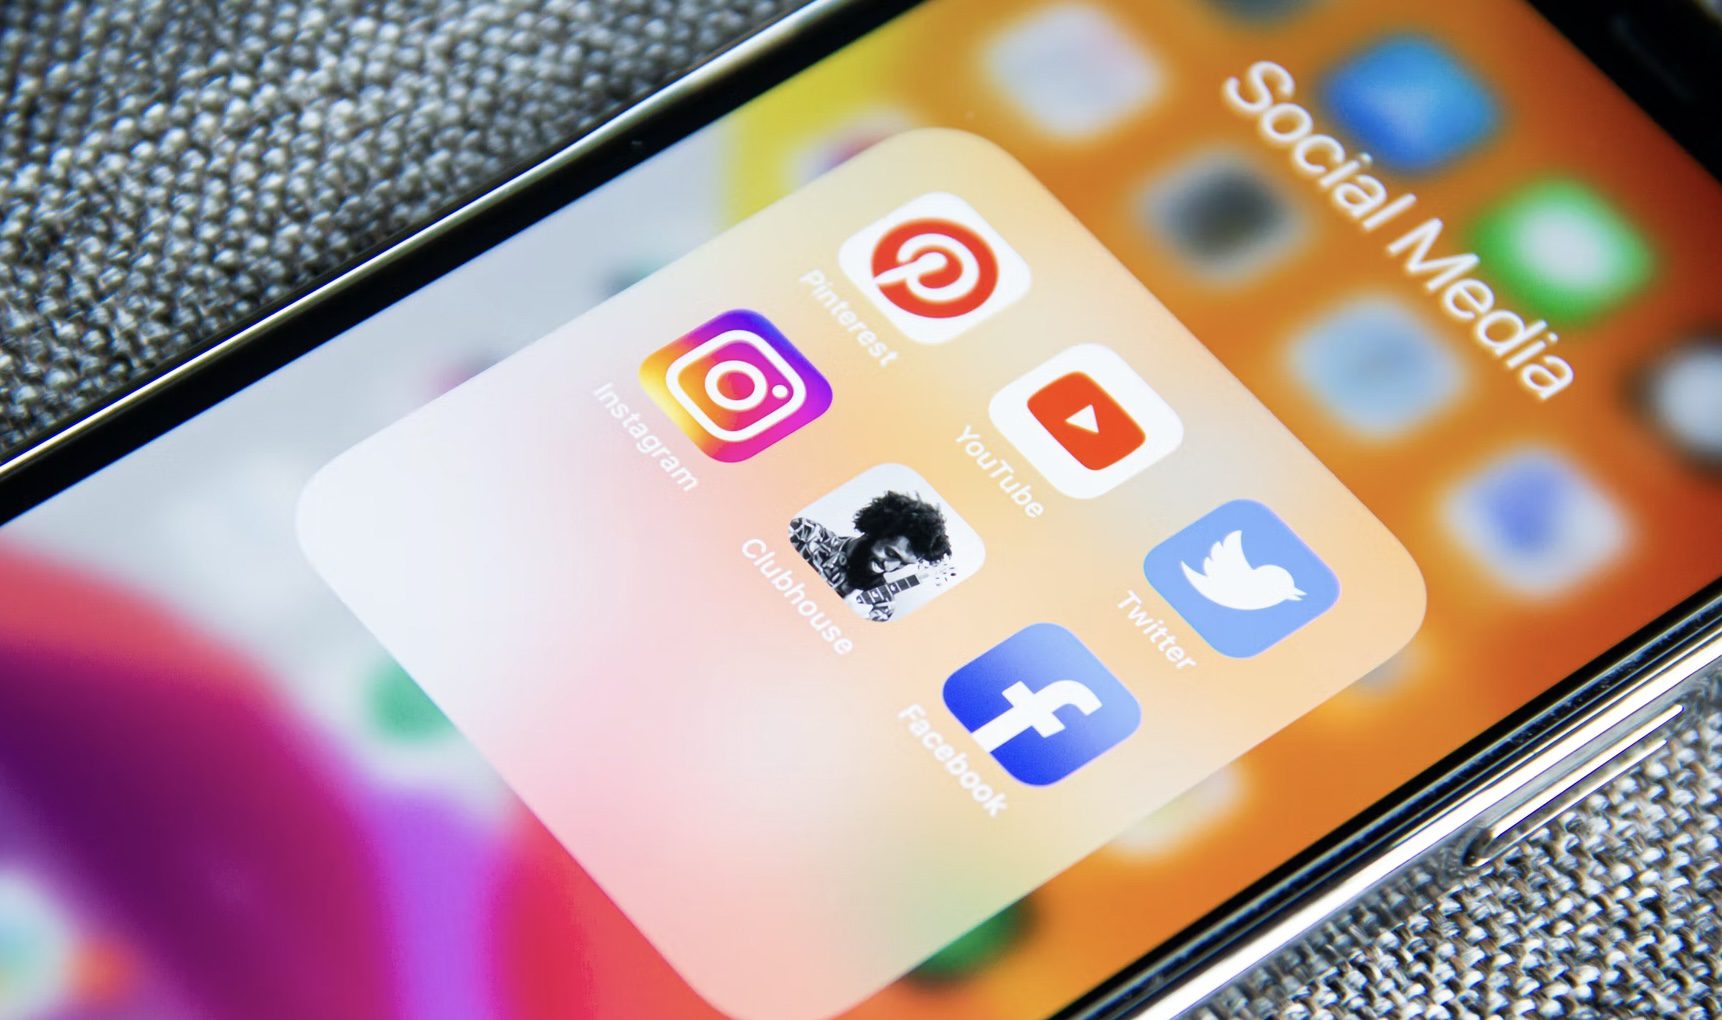 Utah’s New Law Requires Parental Consent for Minors to Use Social Media